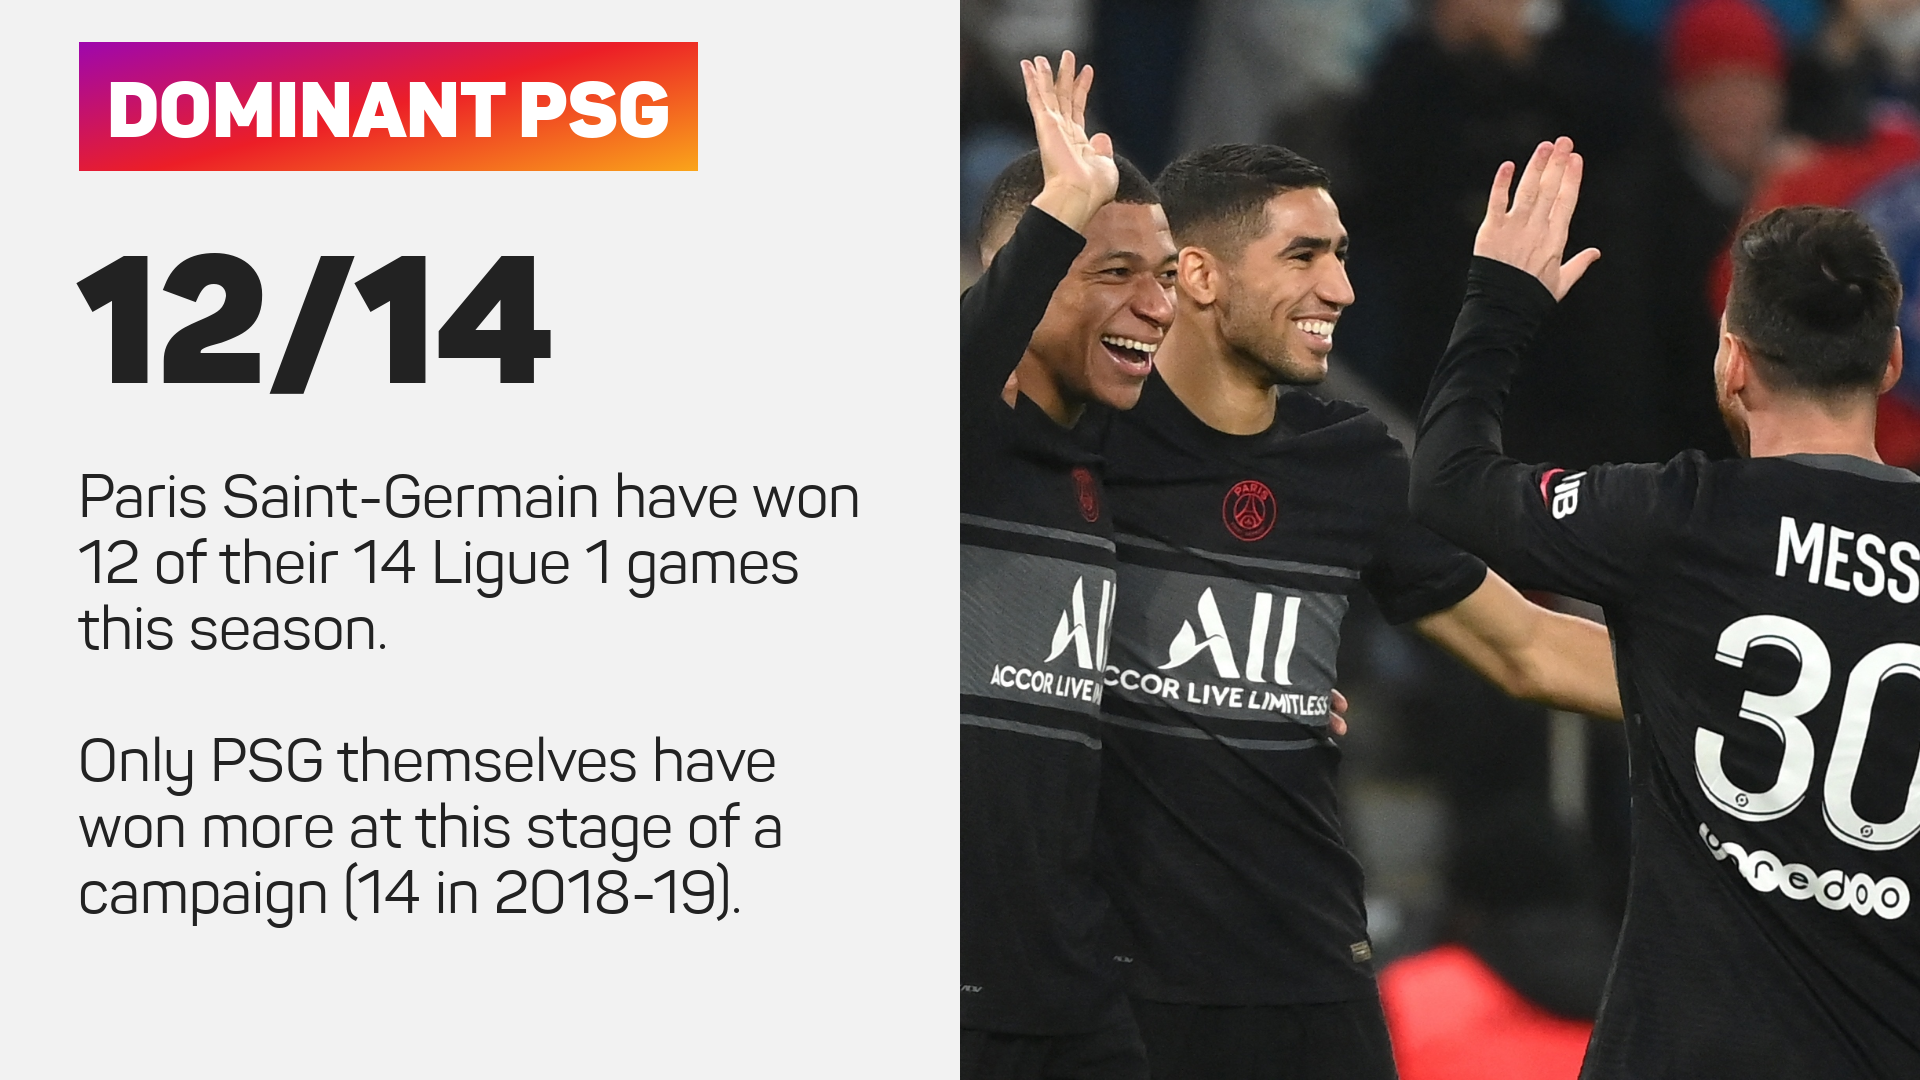 PSG have won 12 of their 14 Ligue 1 games this season